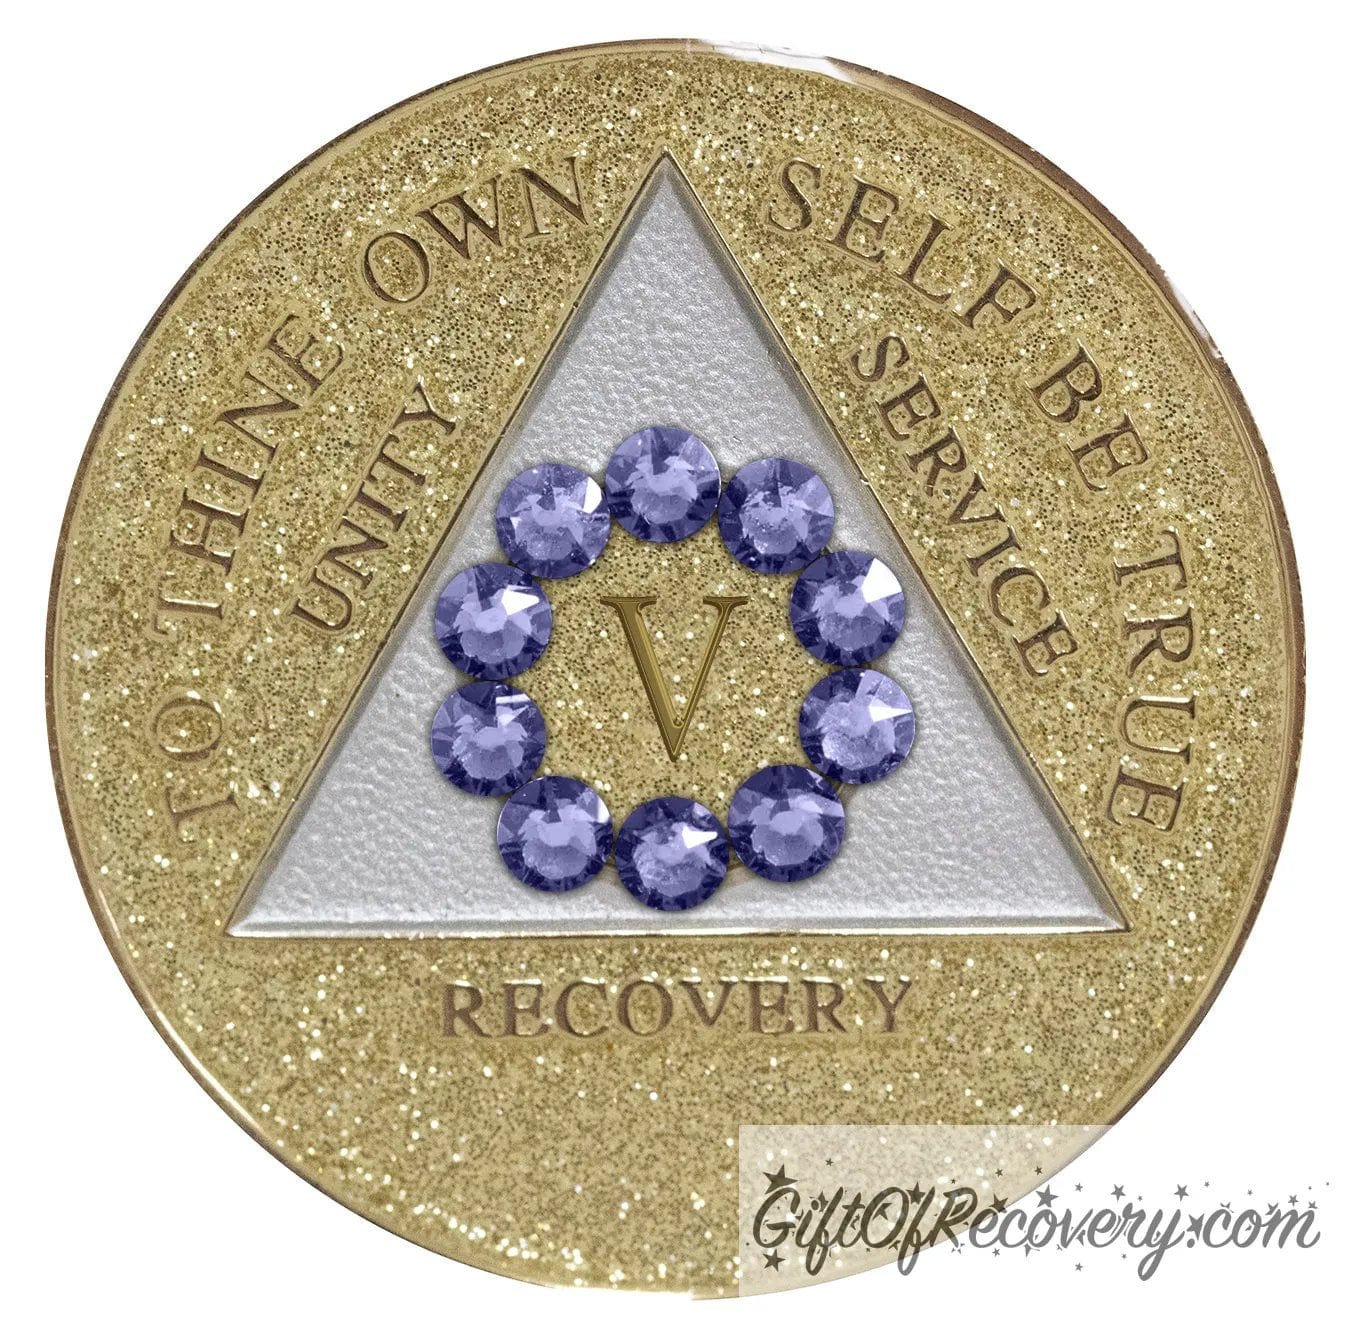 5 year AA medallion gold glitter with ten genuine purple crystal in the shape of a circle around the roman numeral to symbolize our common welfare and personal recovery, and the triangle soft silver, to thine own self be true, unity, service. recovery are embossed with 14k gold-plated brass the recovery medallion is sealed with resin for a scratch free shiny finish.